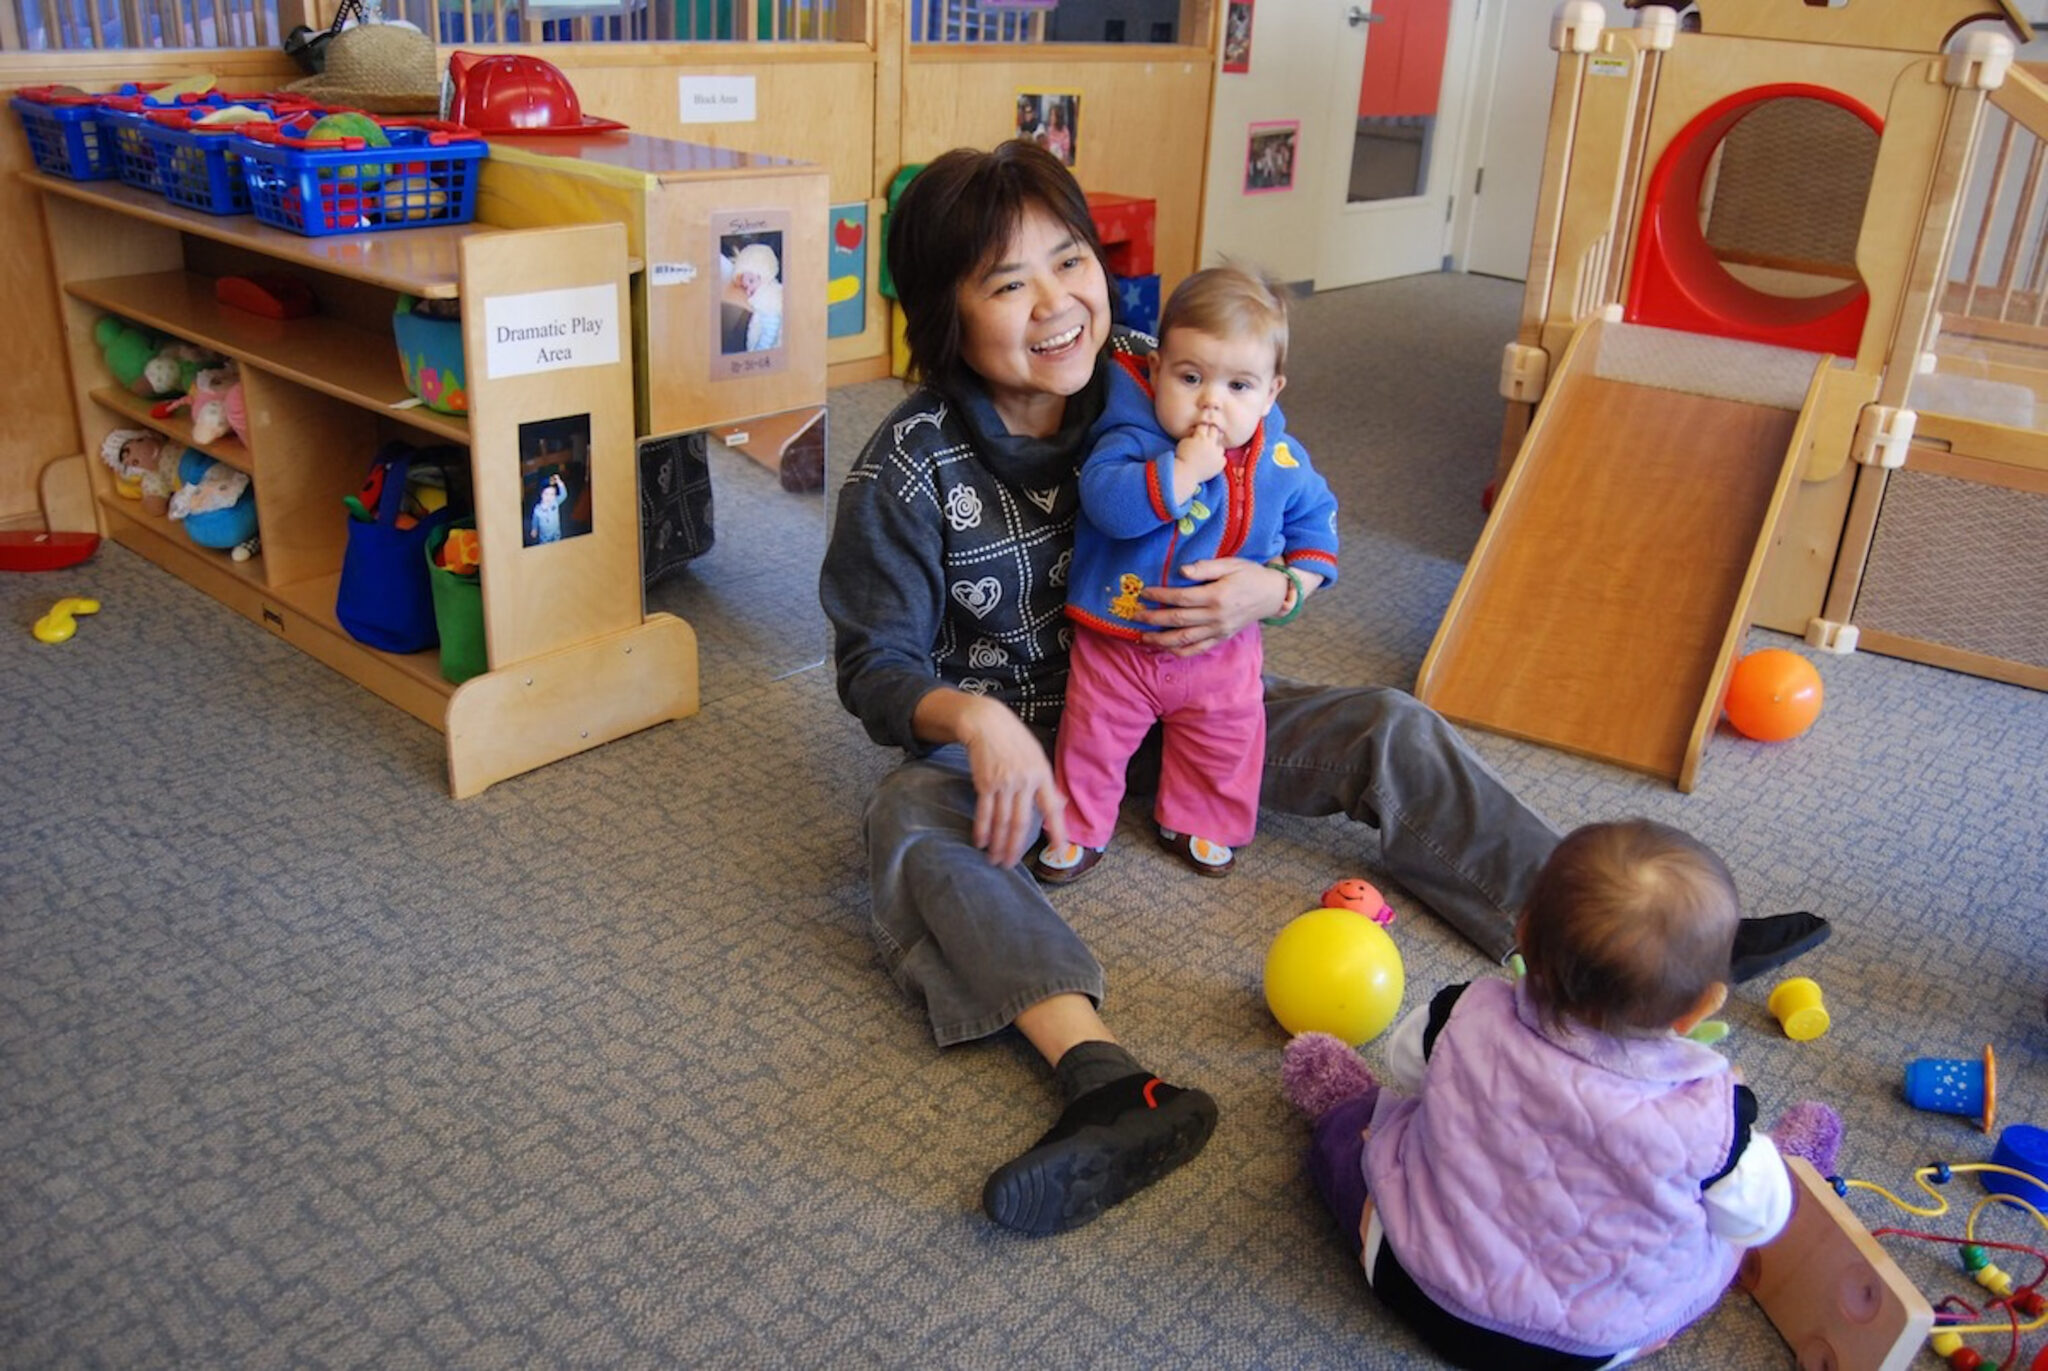 Image of a child care center from the Bipartisan Policy Center 2023 updated report "From the Ground Up: Improving Child Care and Early Learning Facilities"